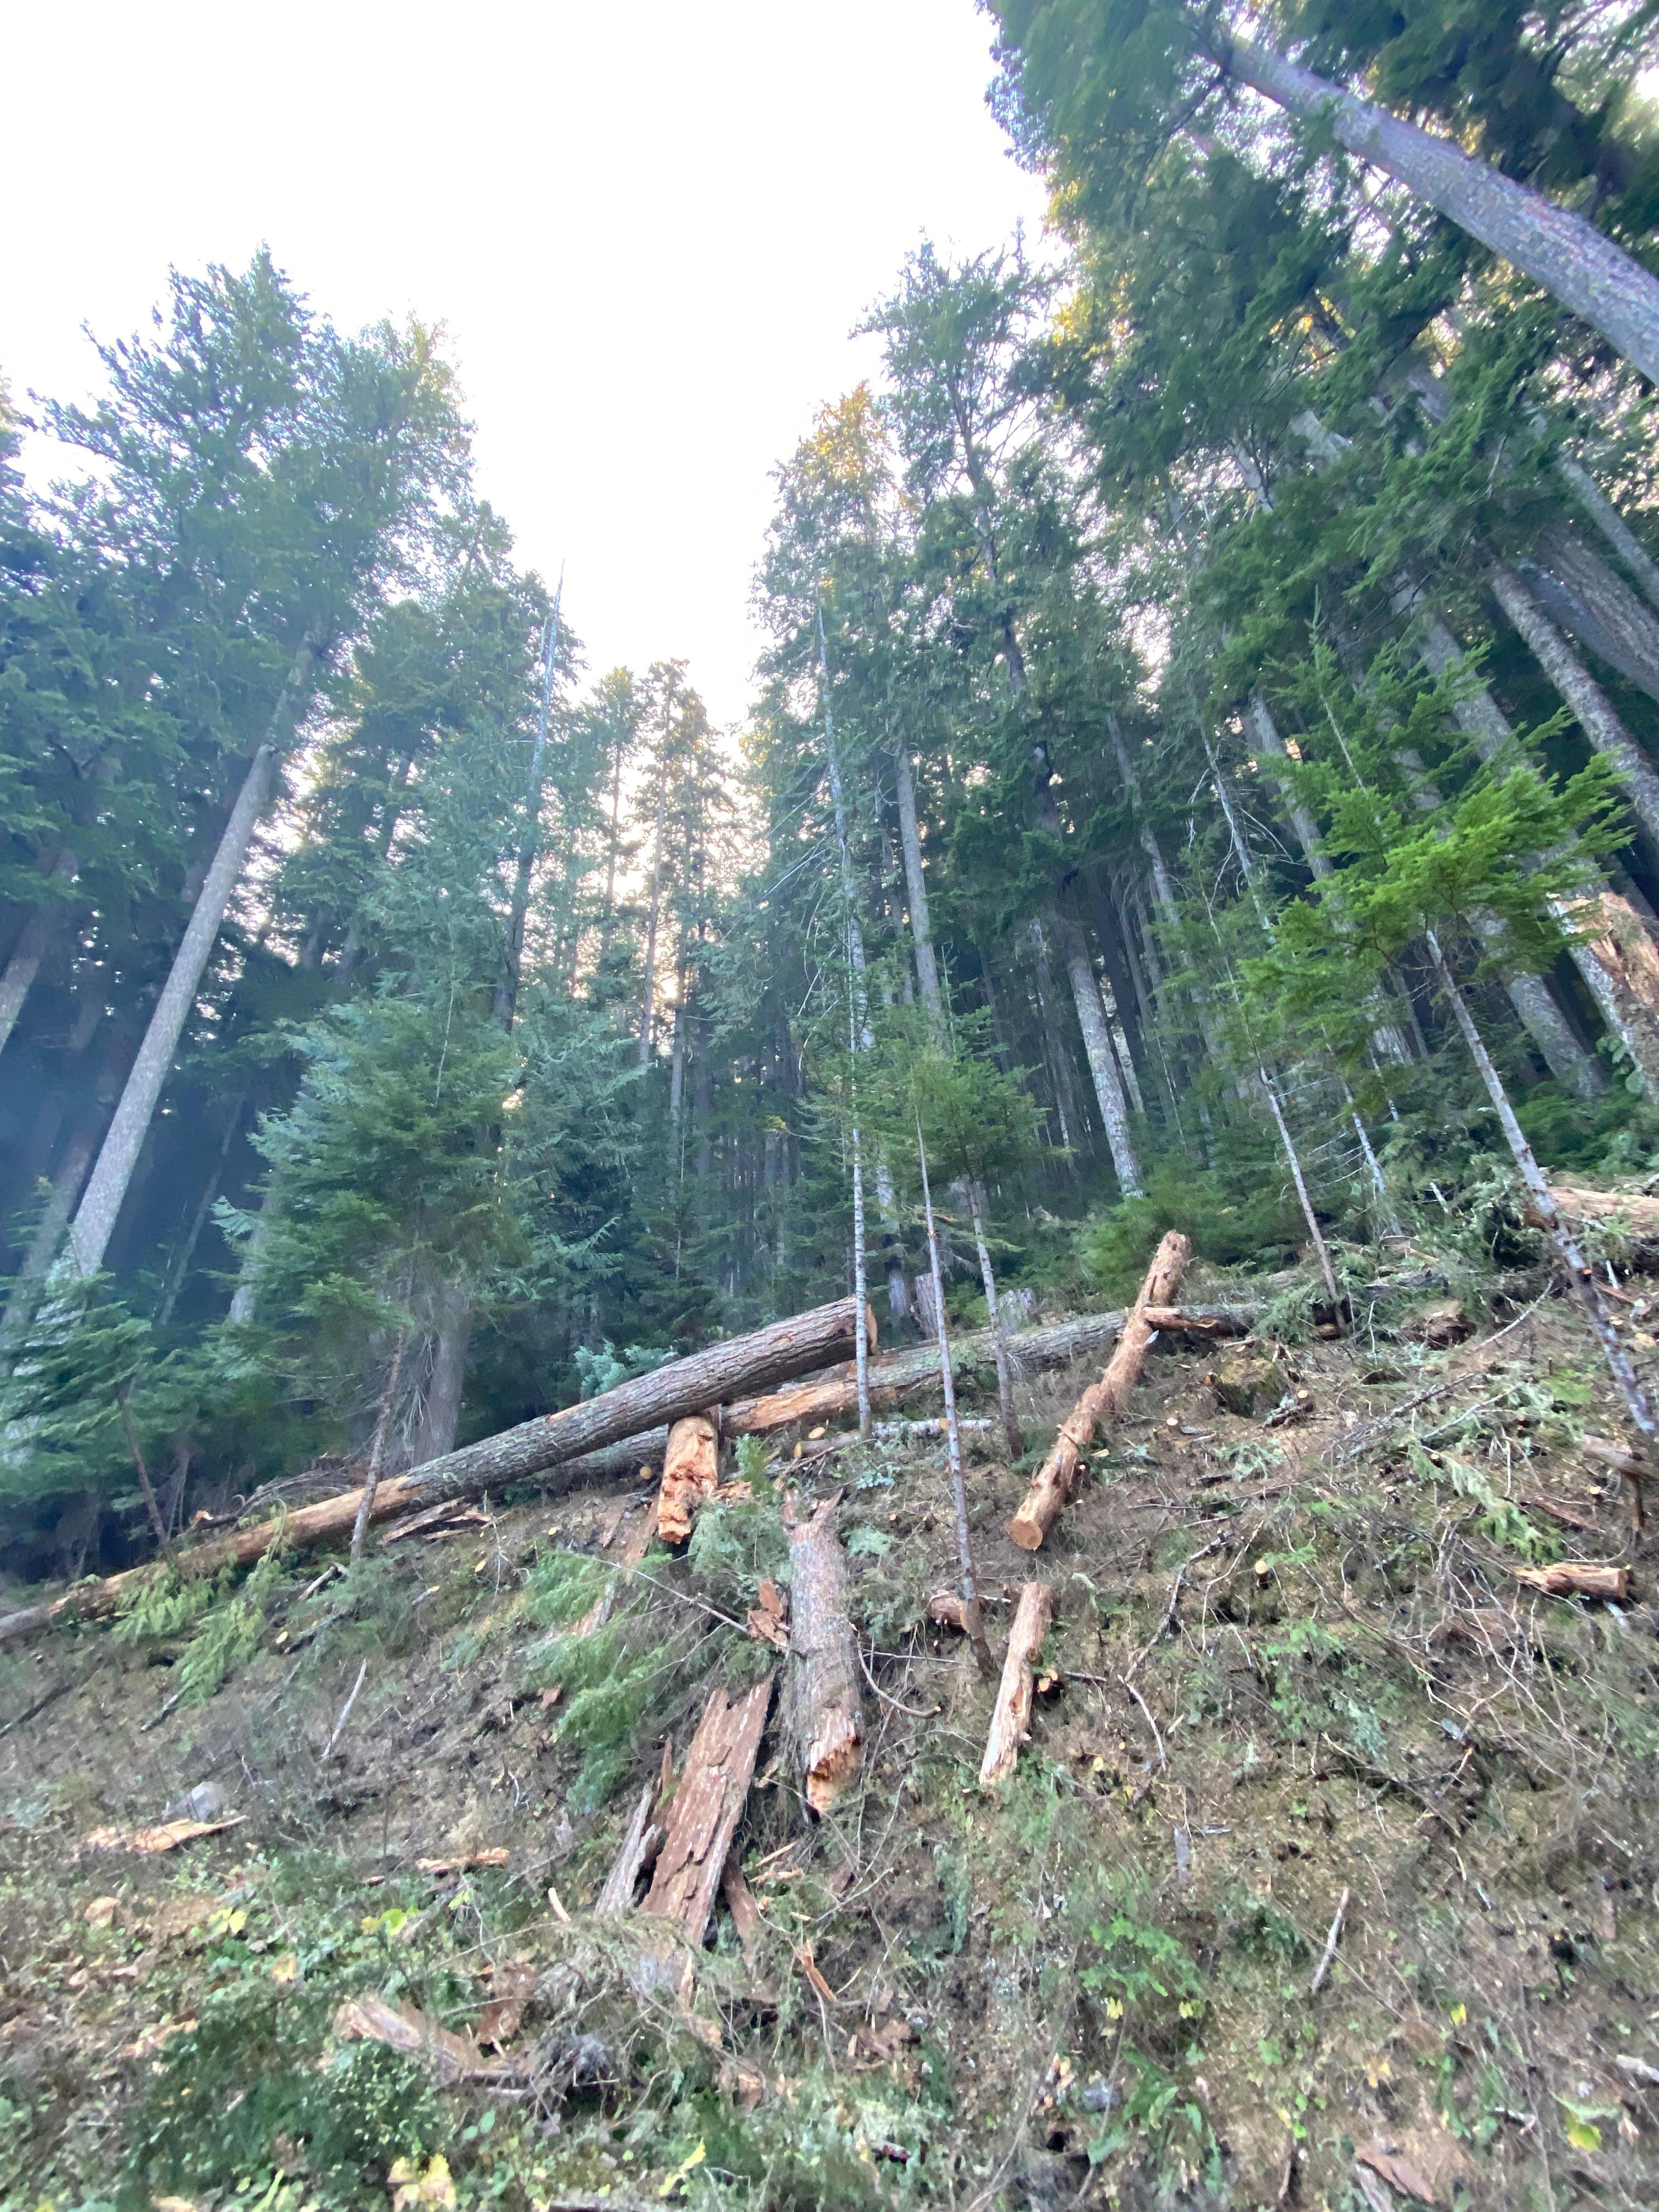 A slope above a road has several large logs and chunks of wood on the ground. Large trees are in the background.